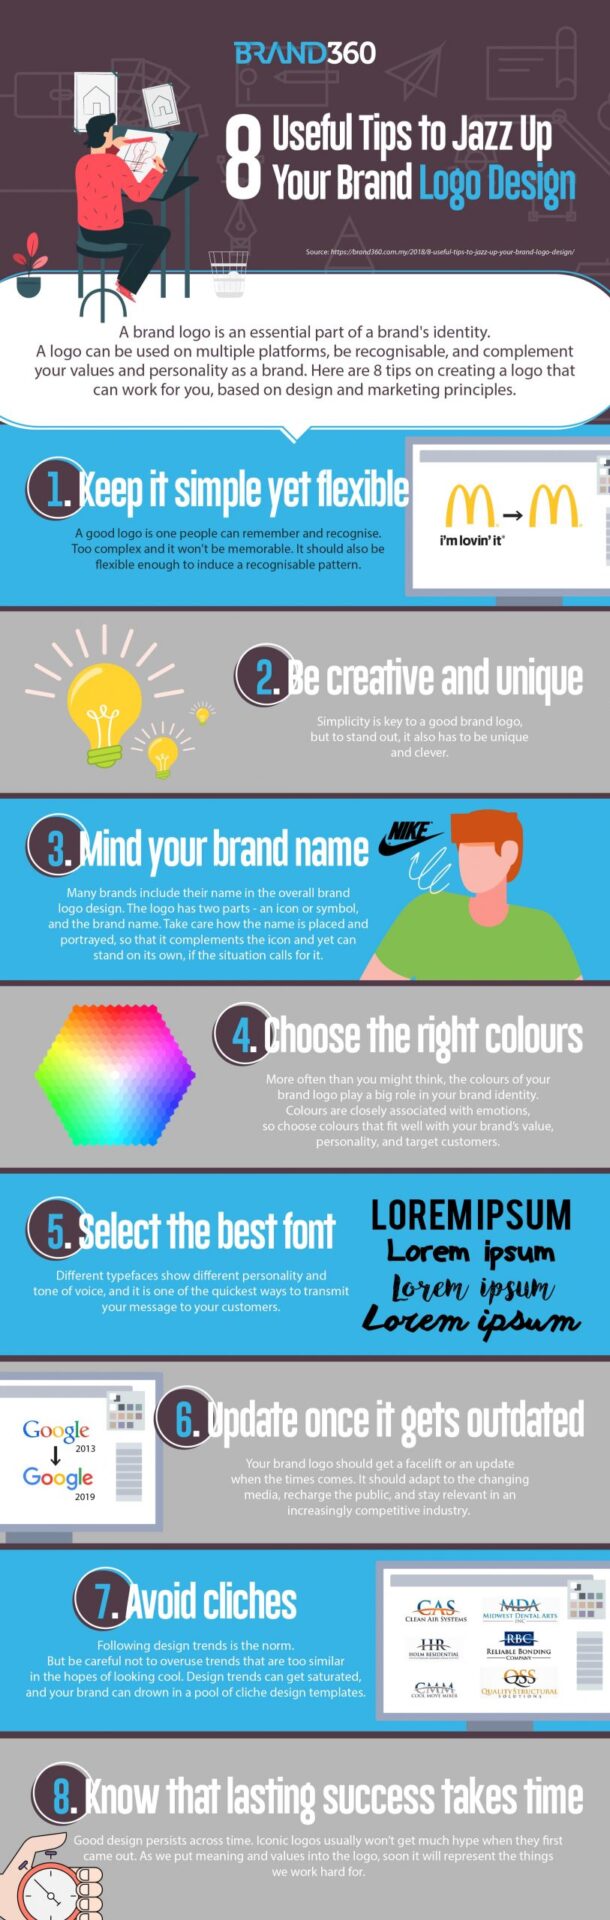 Infographic] 8 Useful Tips to Jazz Up Your Brand Logo Design - Brand360